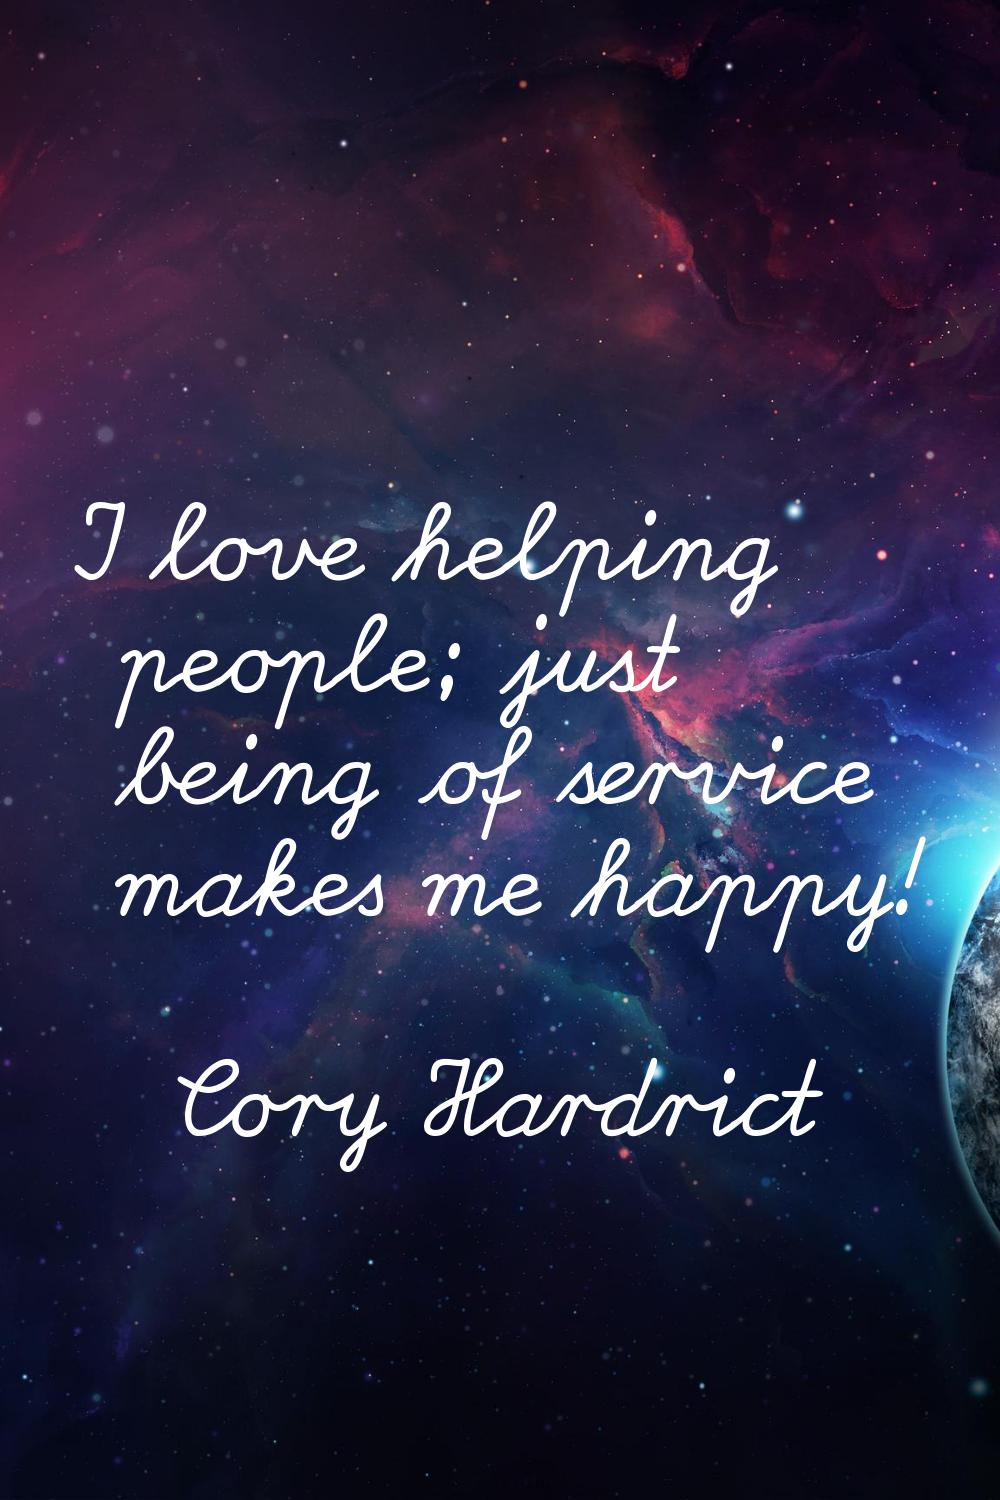 I love helping people; just being of service makes me happy!